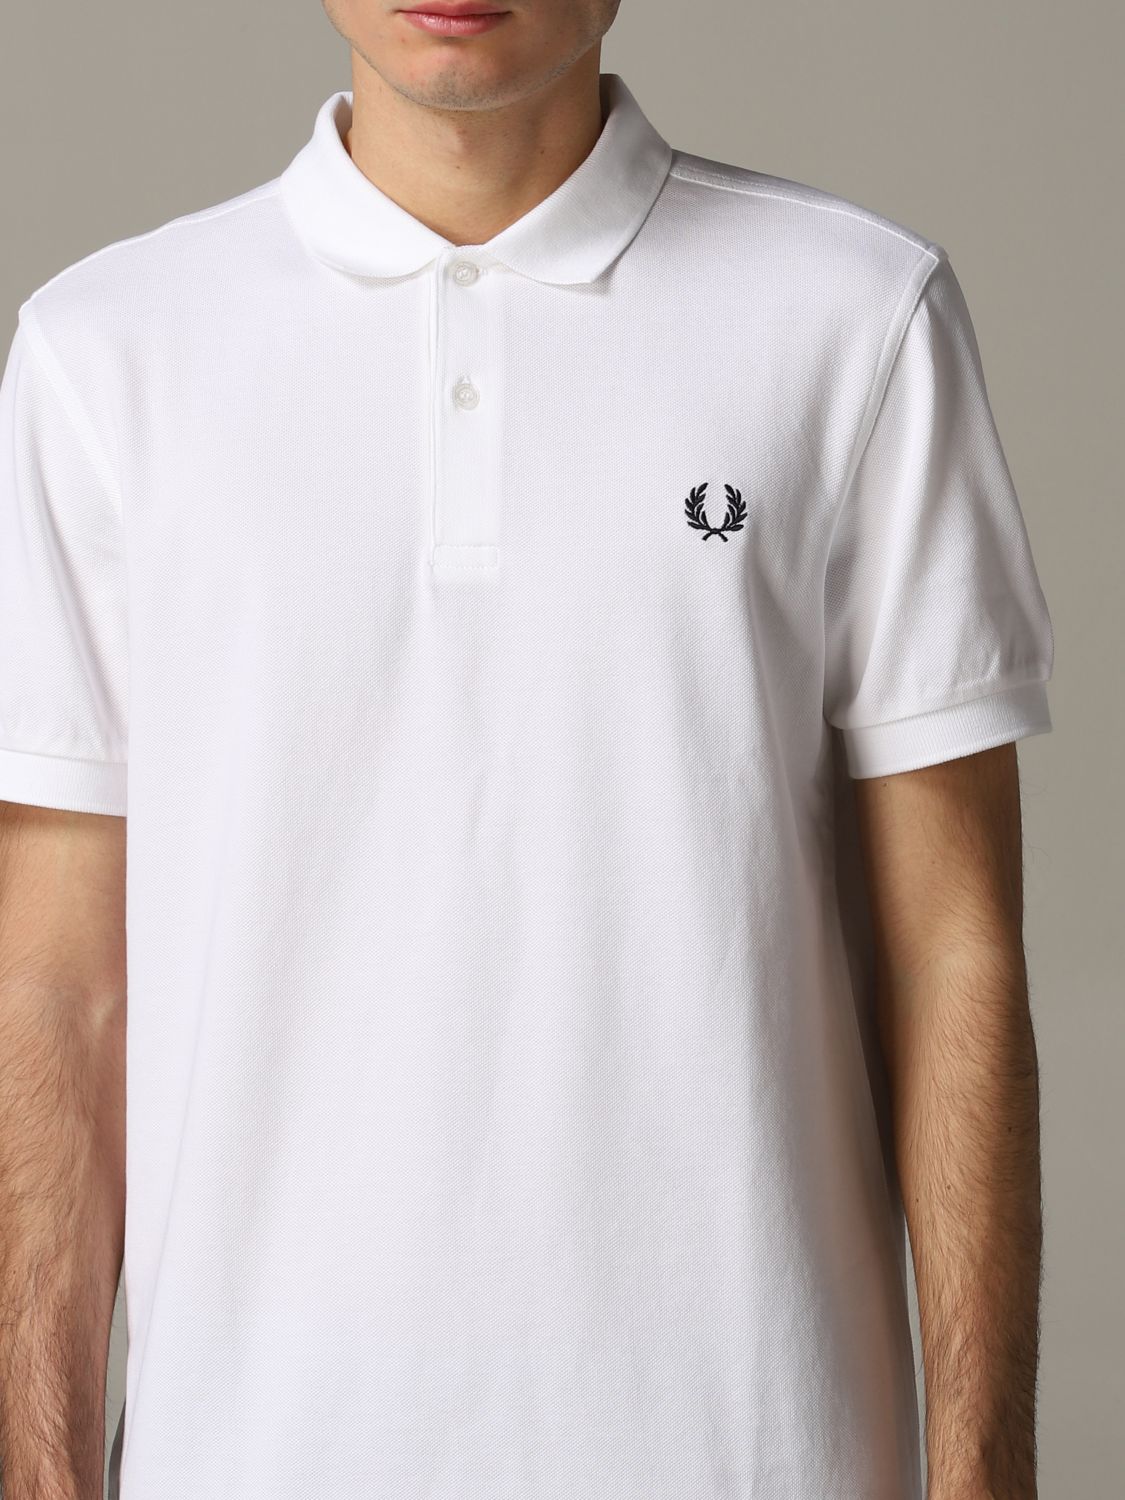 Polo Fred Perry Outlet Online Shop - 1688486180